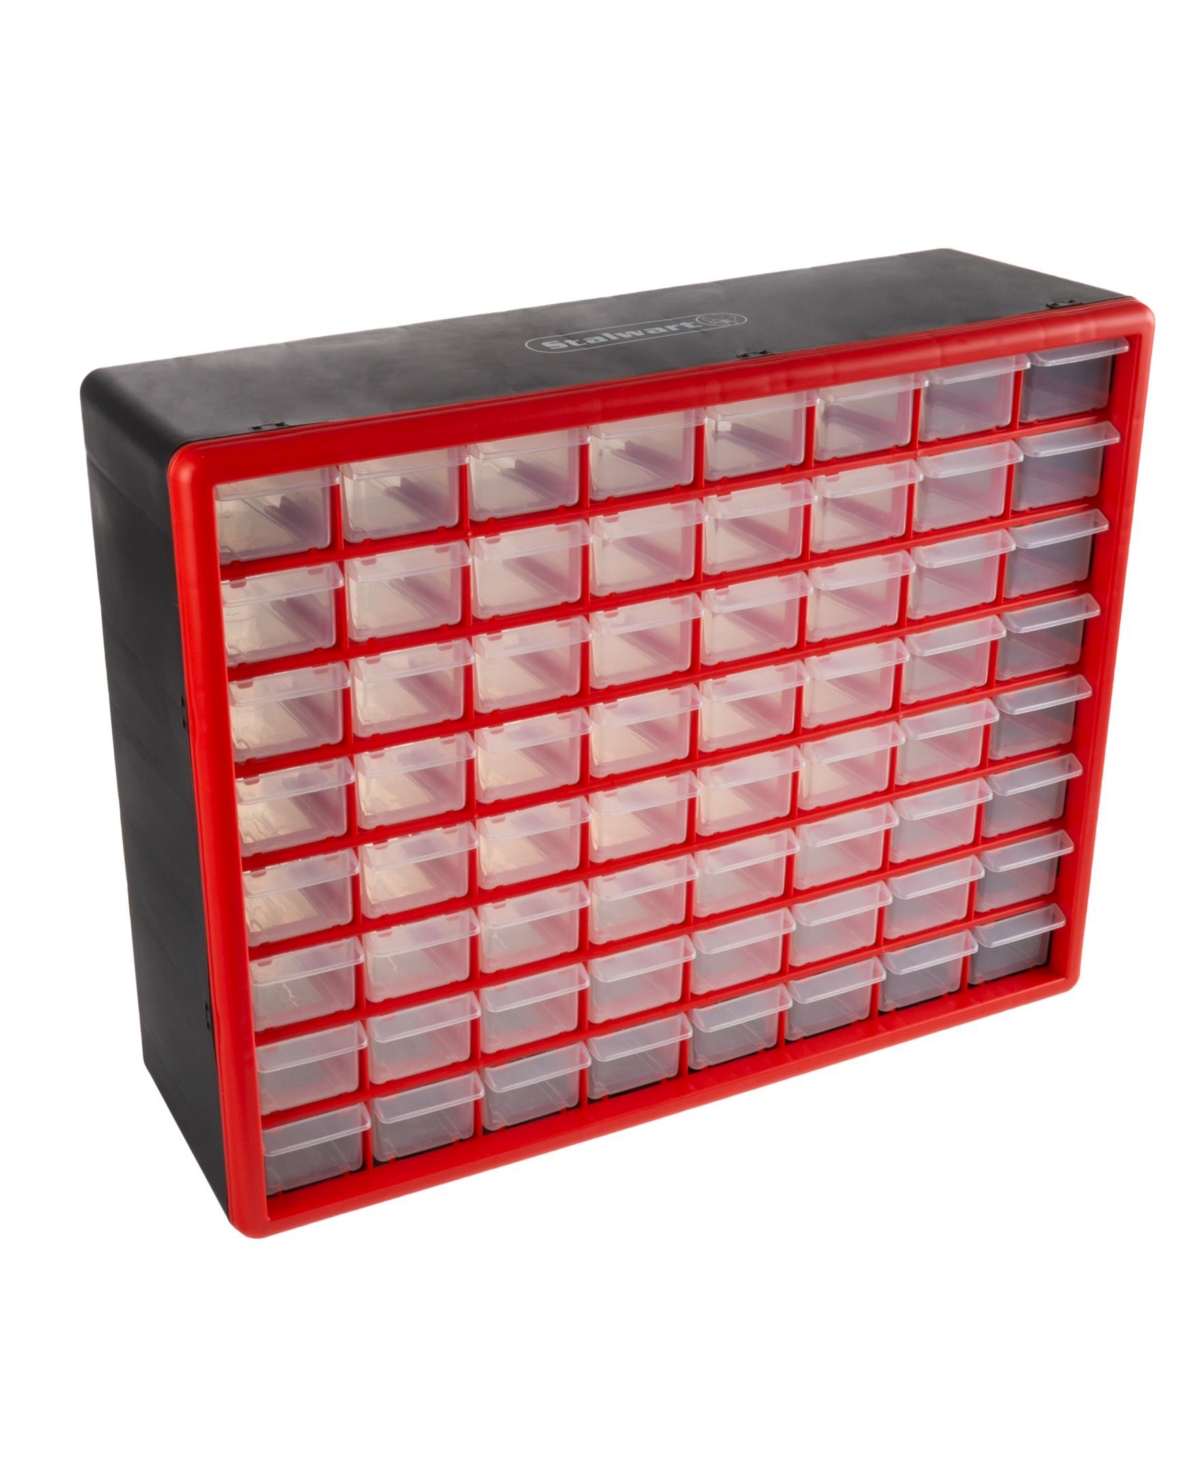 Trademark Global Storage Drawers In No Color